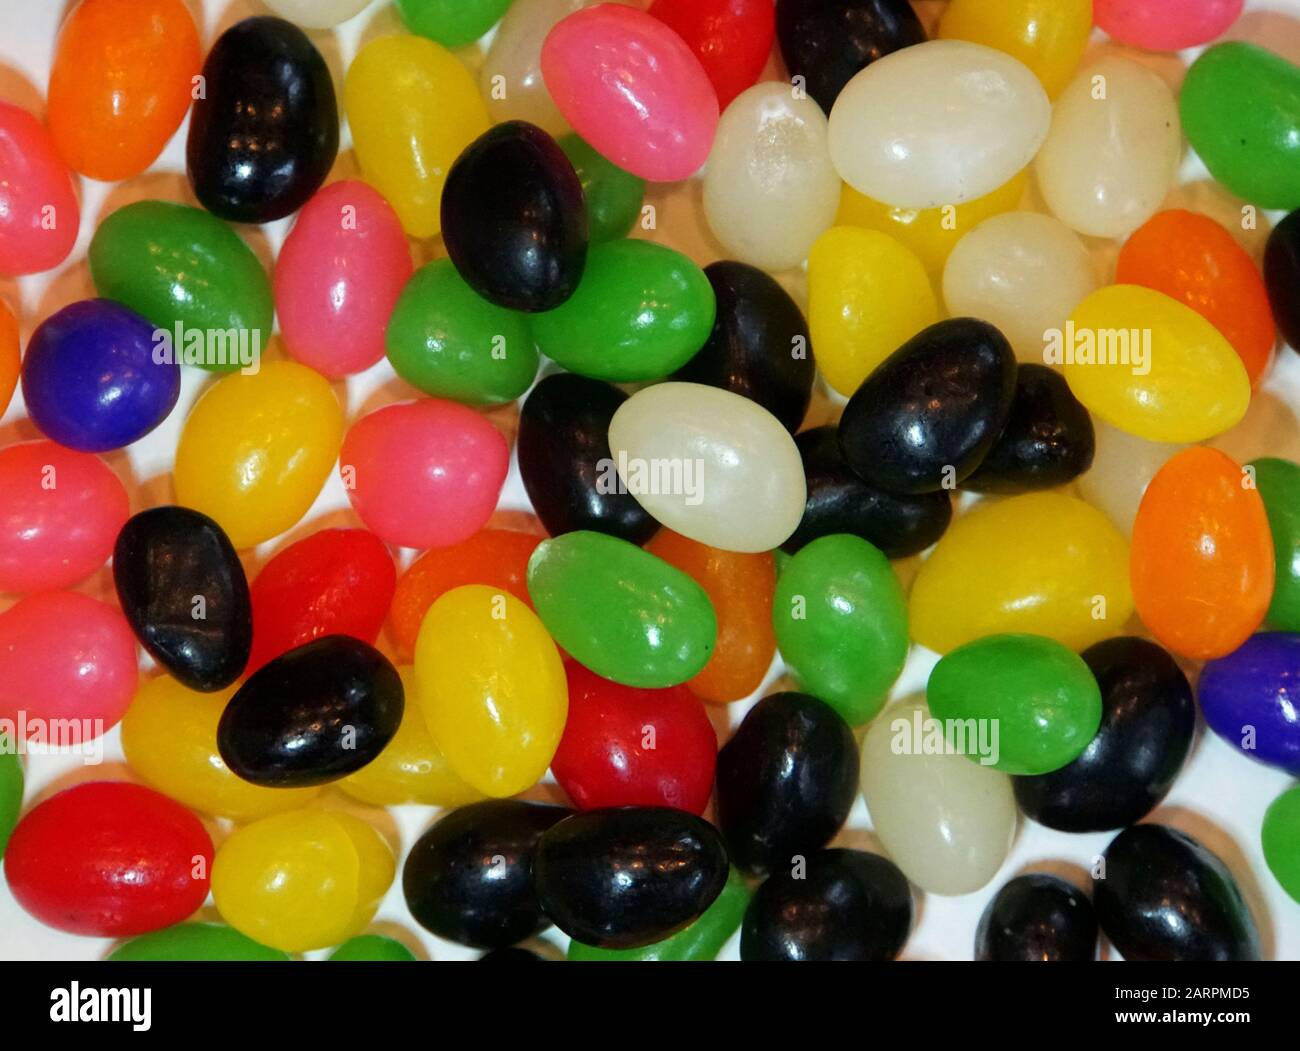 A bunch of colorful egg-shaped jelly beans candies Stock Photo